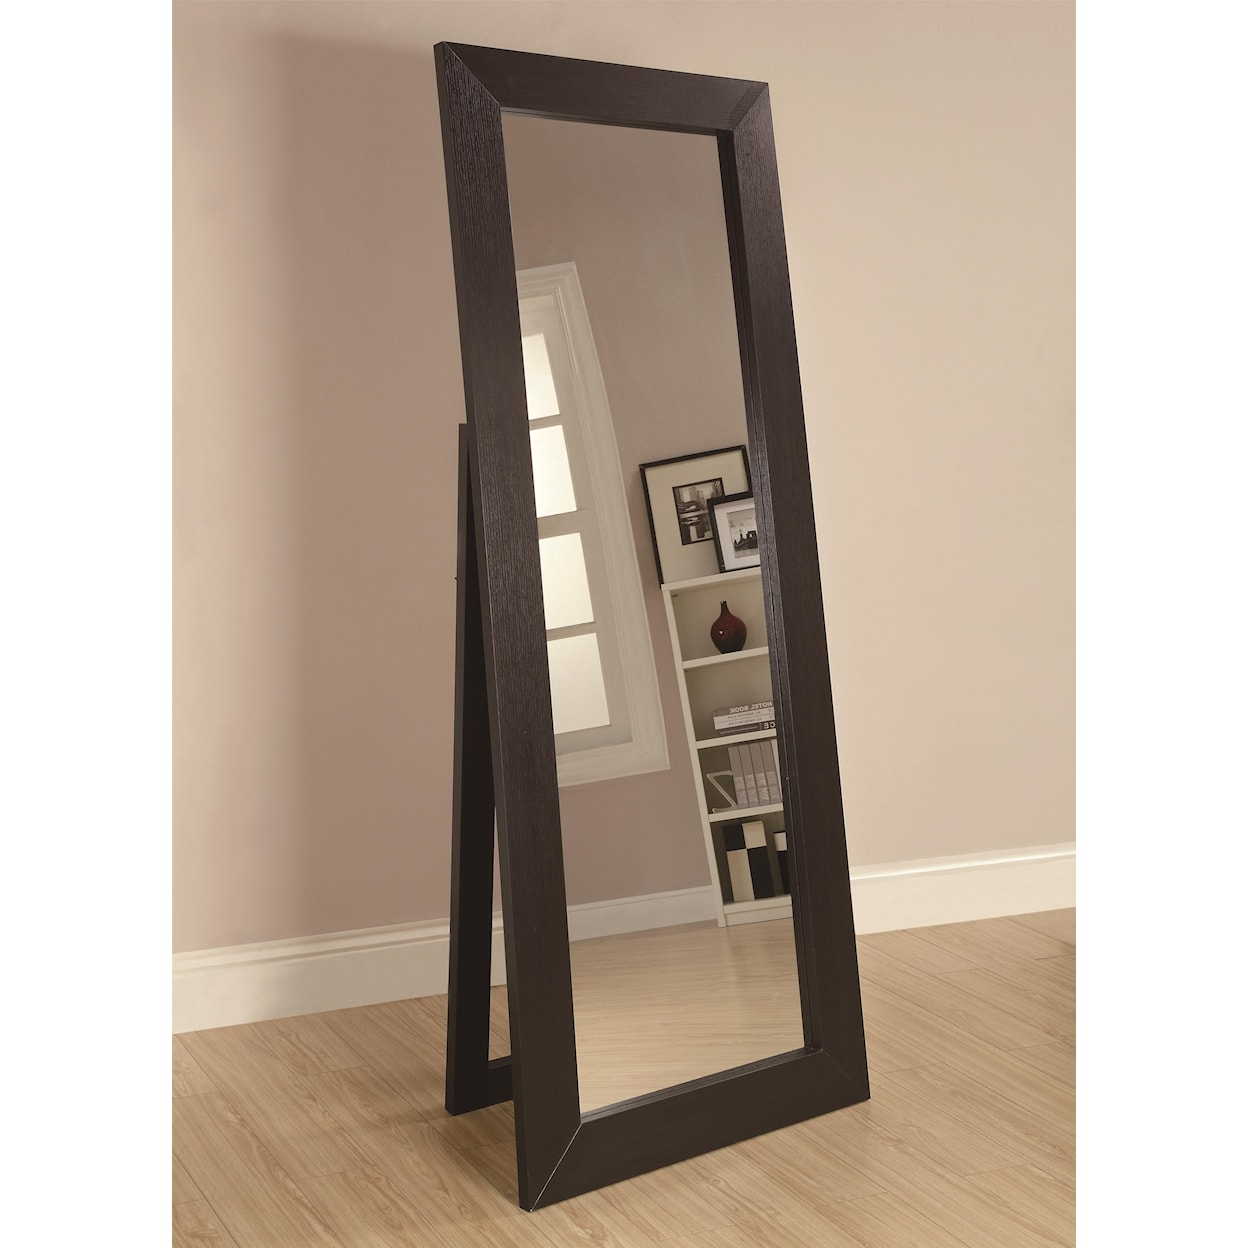 Mirror Frames, Custom Mirrors and Custom Framed Mirrors serving NY, NYC and  Westchester areas